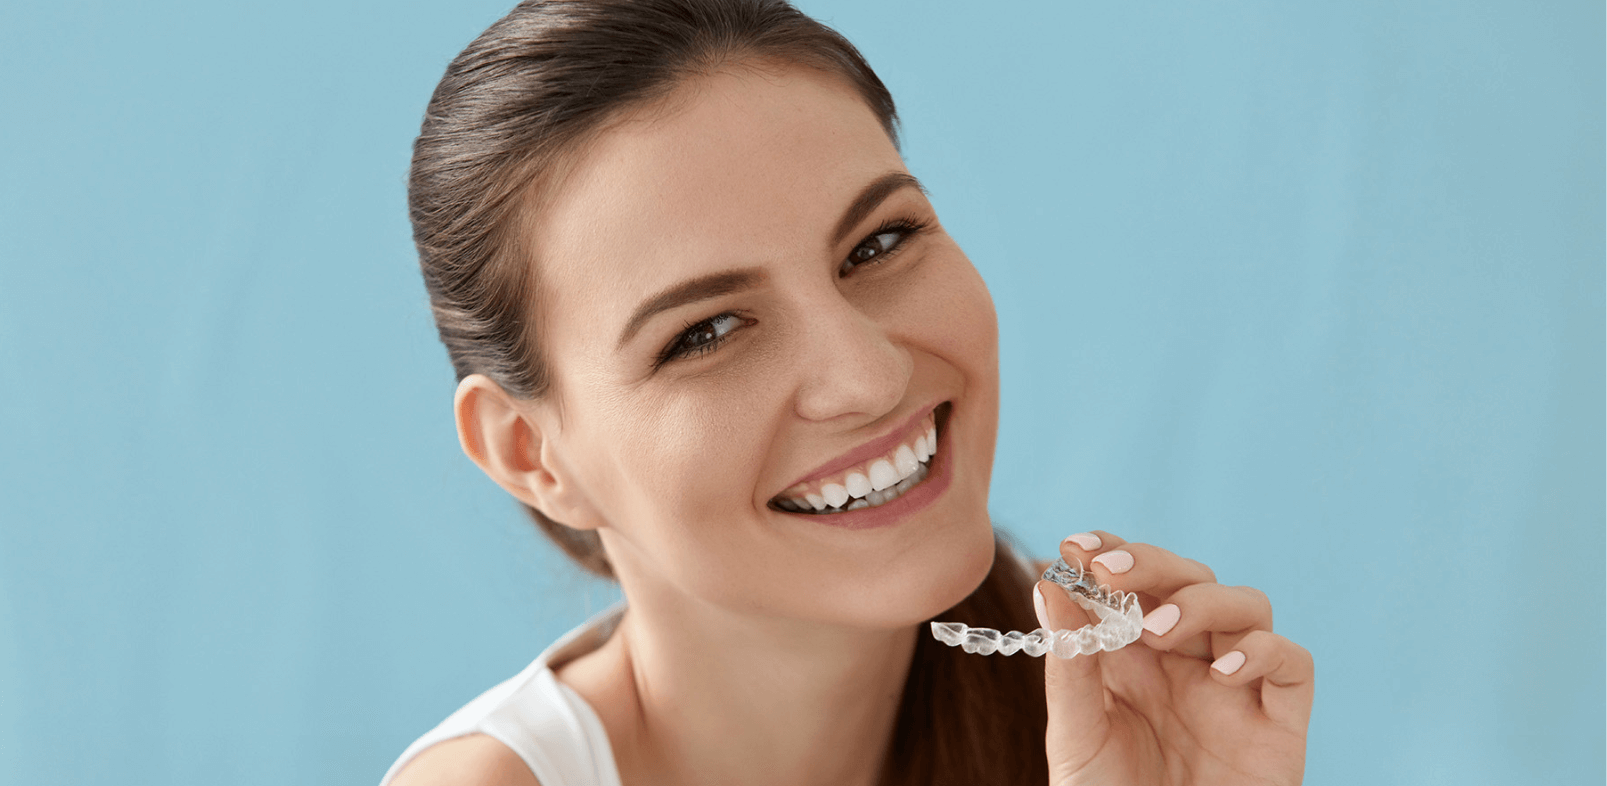 Brunette lady putting Invisalign braces into her mouth whilst smiling